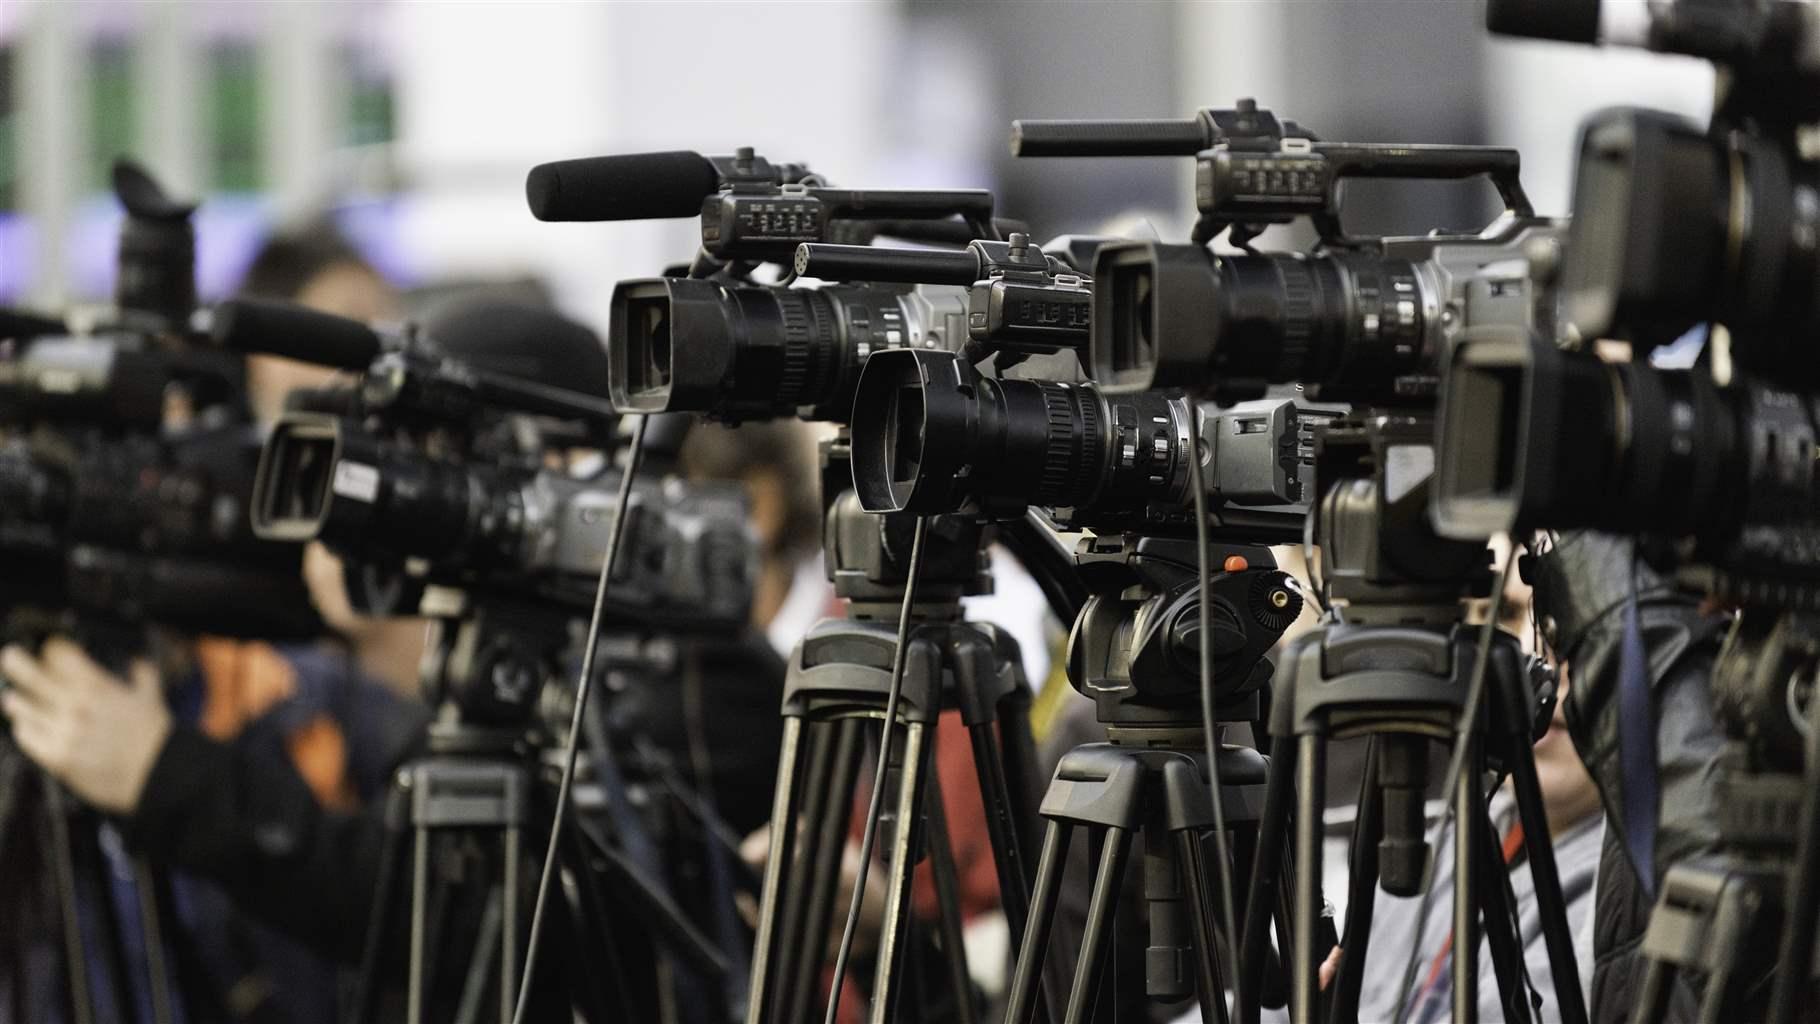 Five video cameras on tripods stand in a line, with one reporter holding a camera slightly out of focus, all aimed at the same subject.